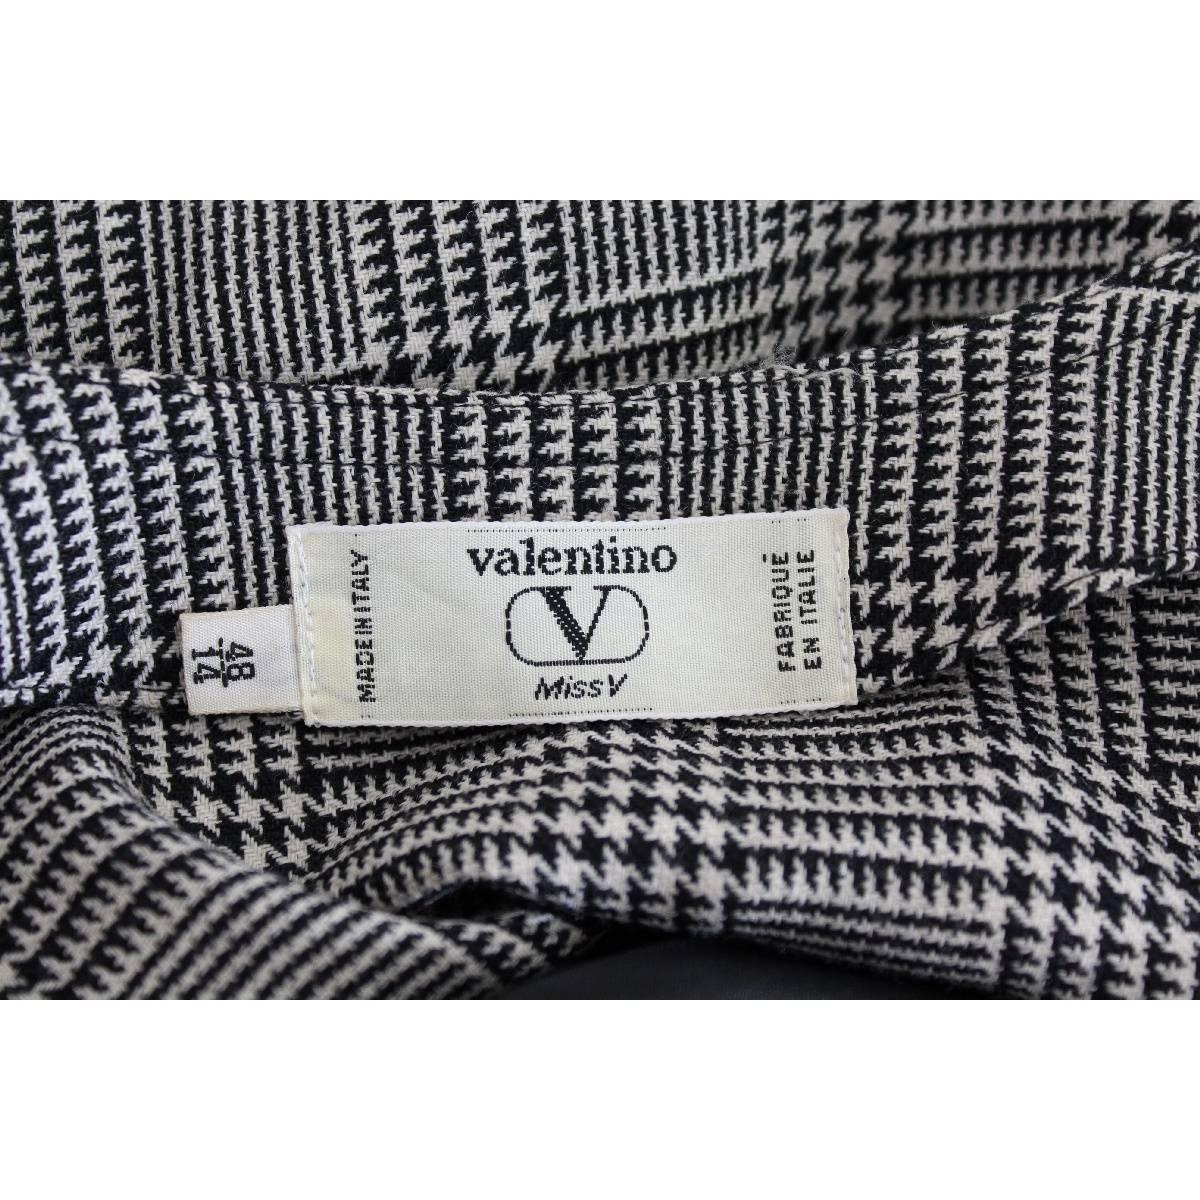 Valentino vintage wool check dress black and white size 48 mother of pearl butto 1